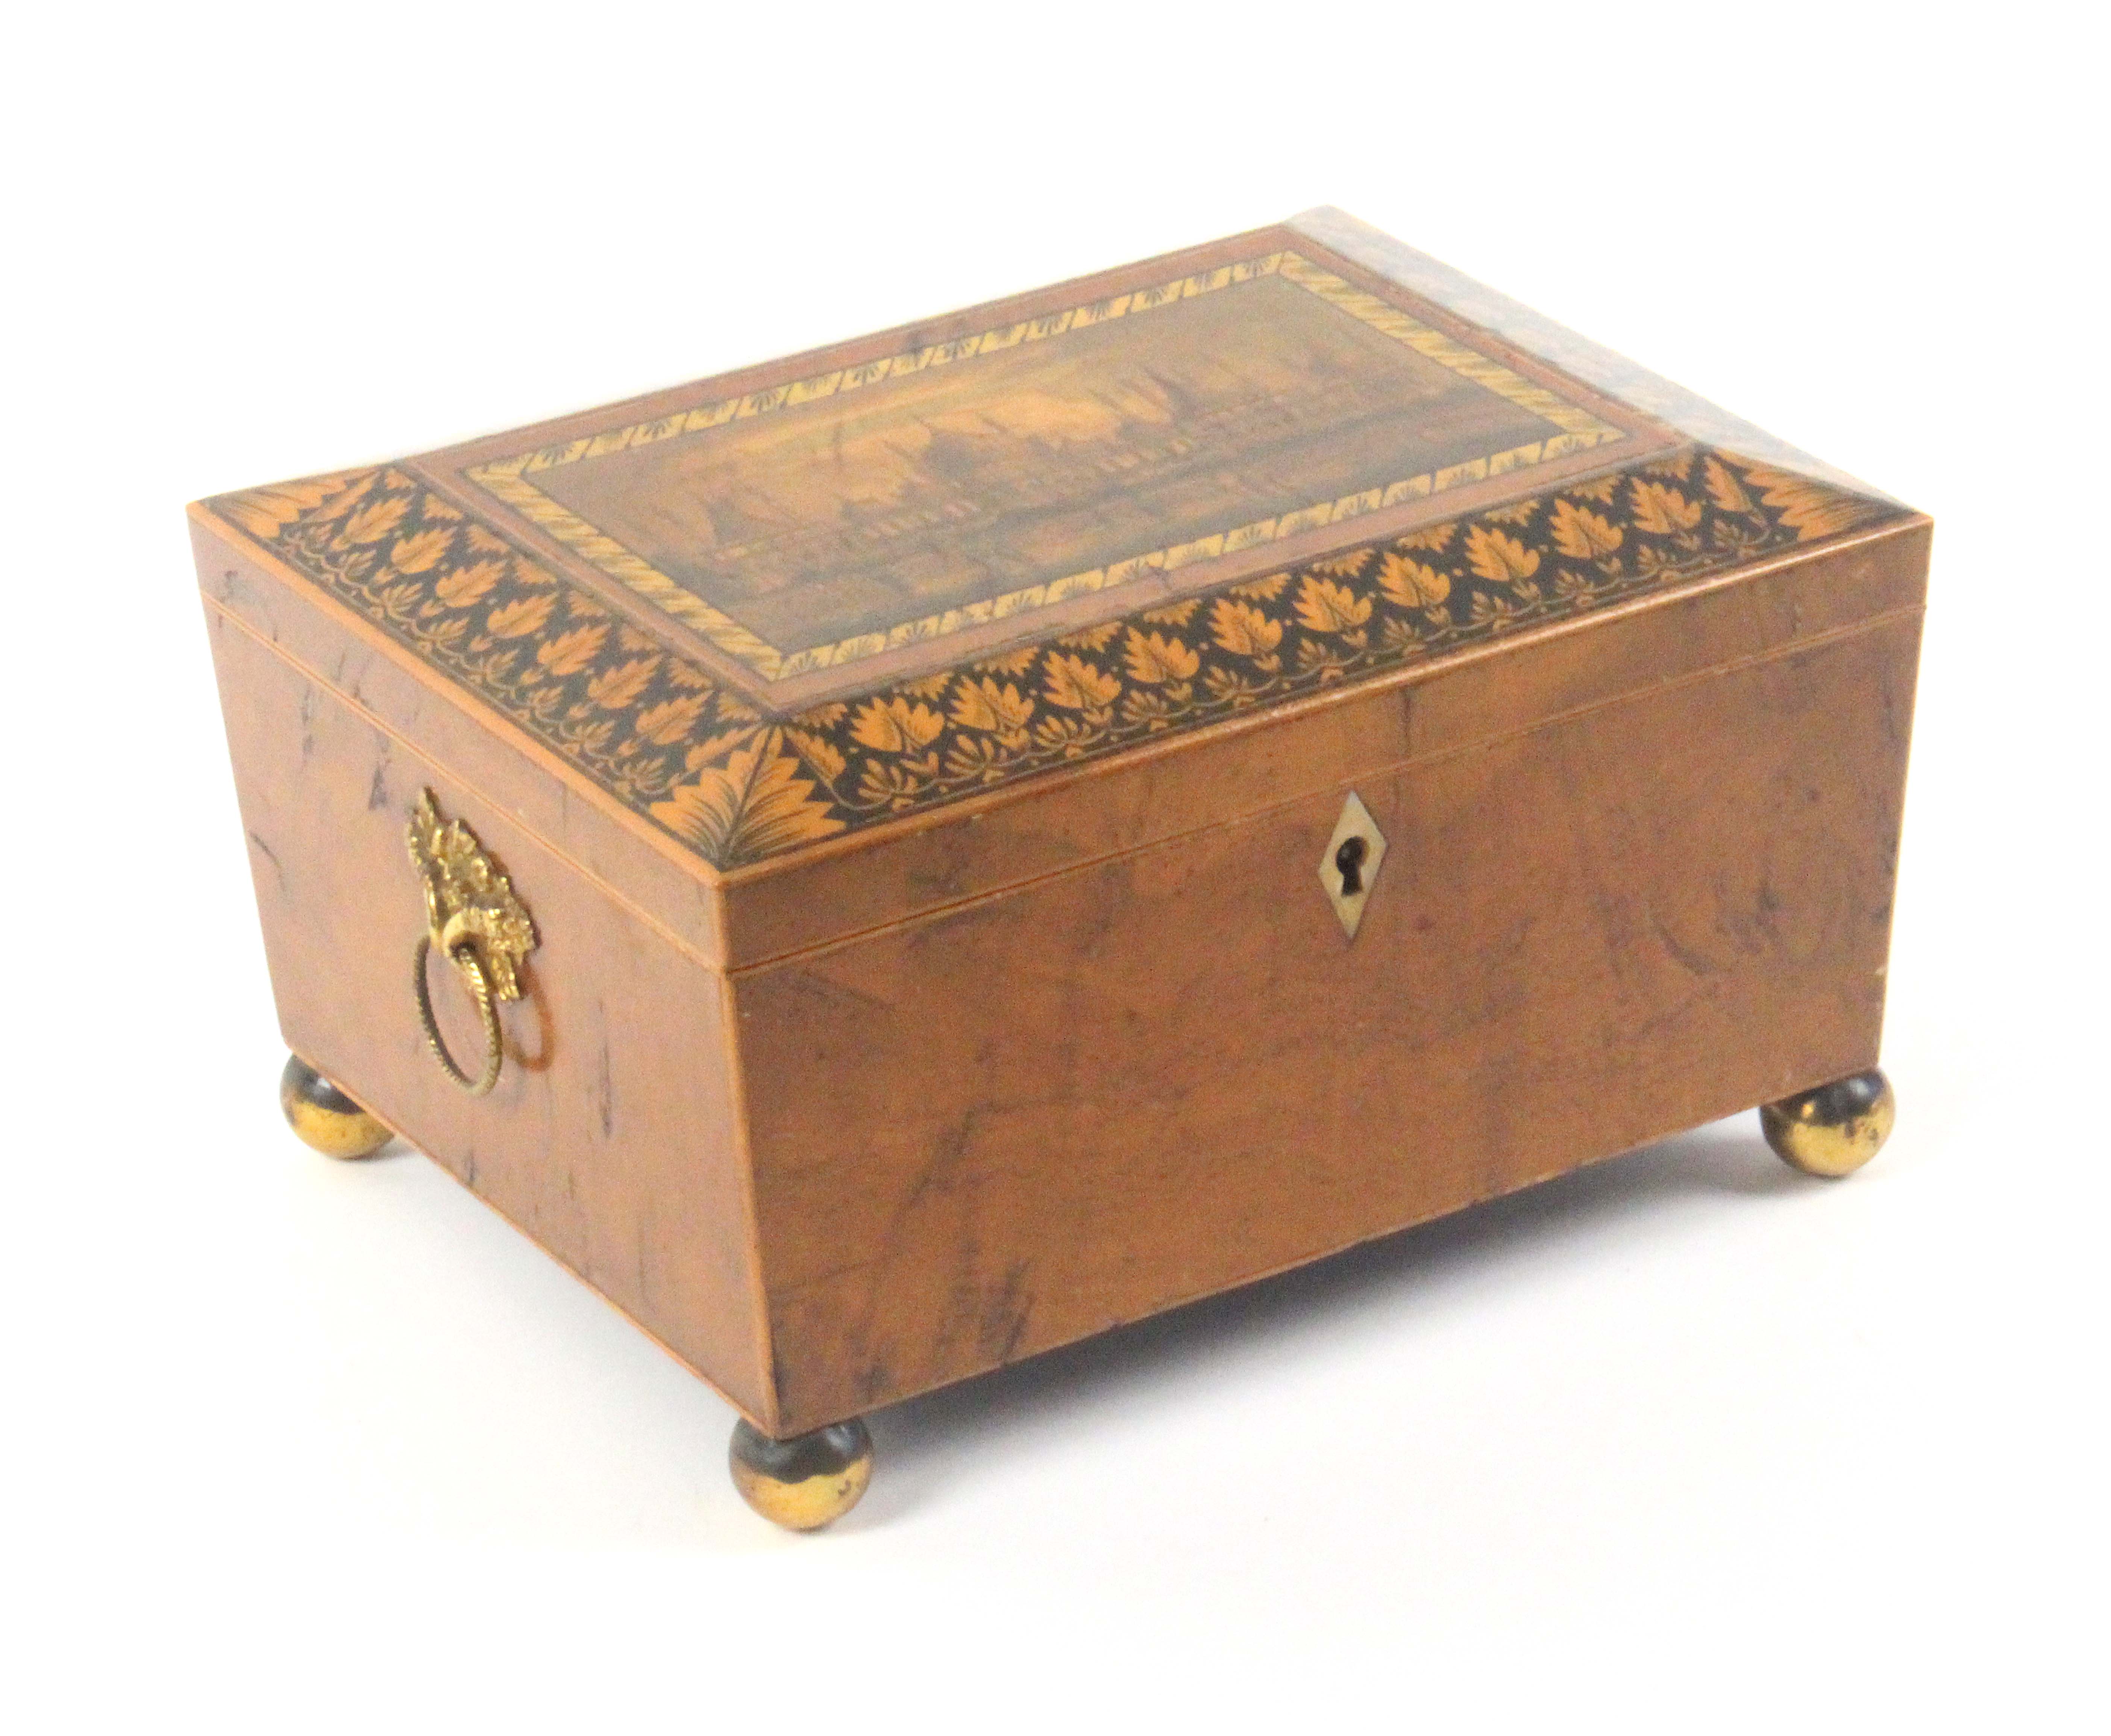 An early print and paint decorated Tunbridge ware sewing box in burr elm, of sarcophagol form, the